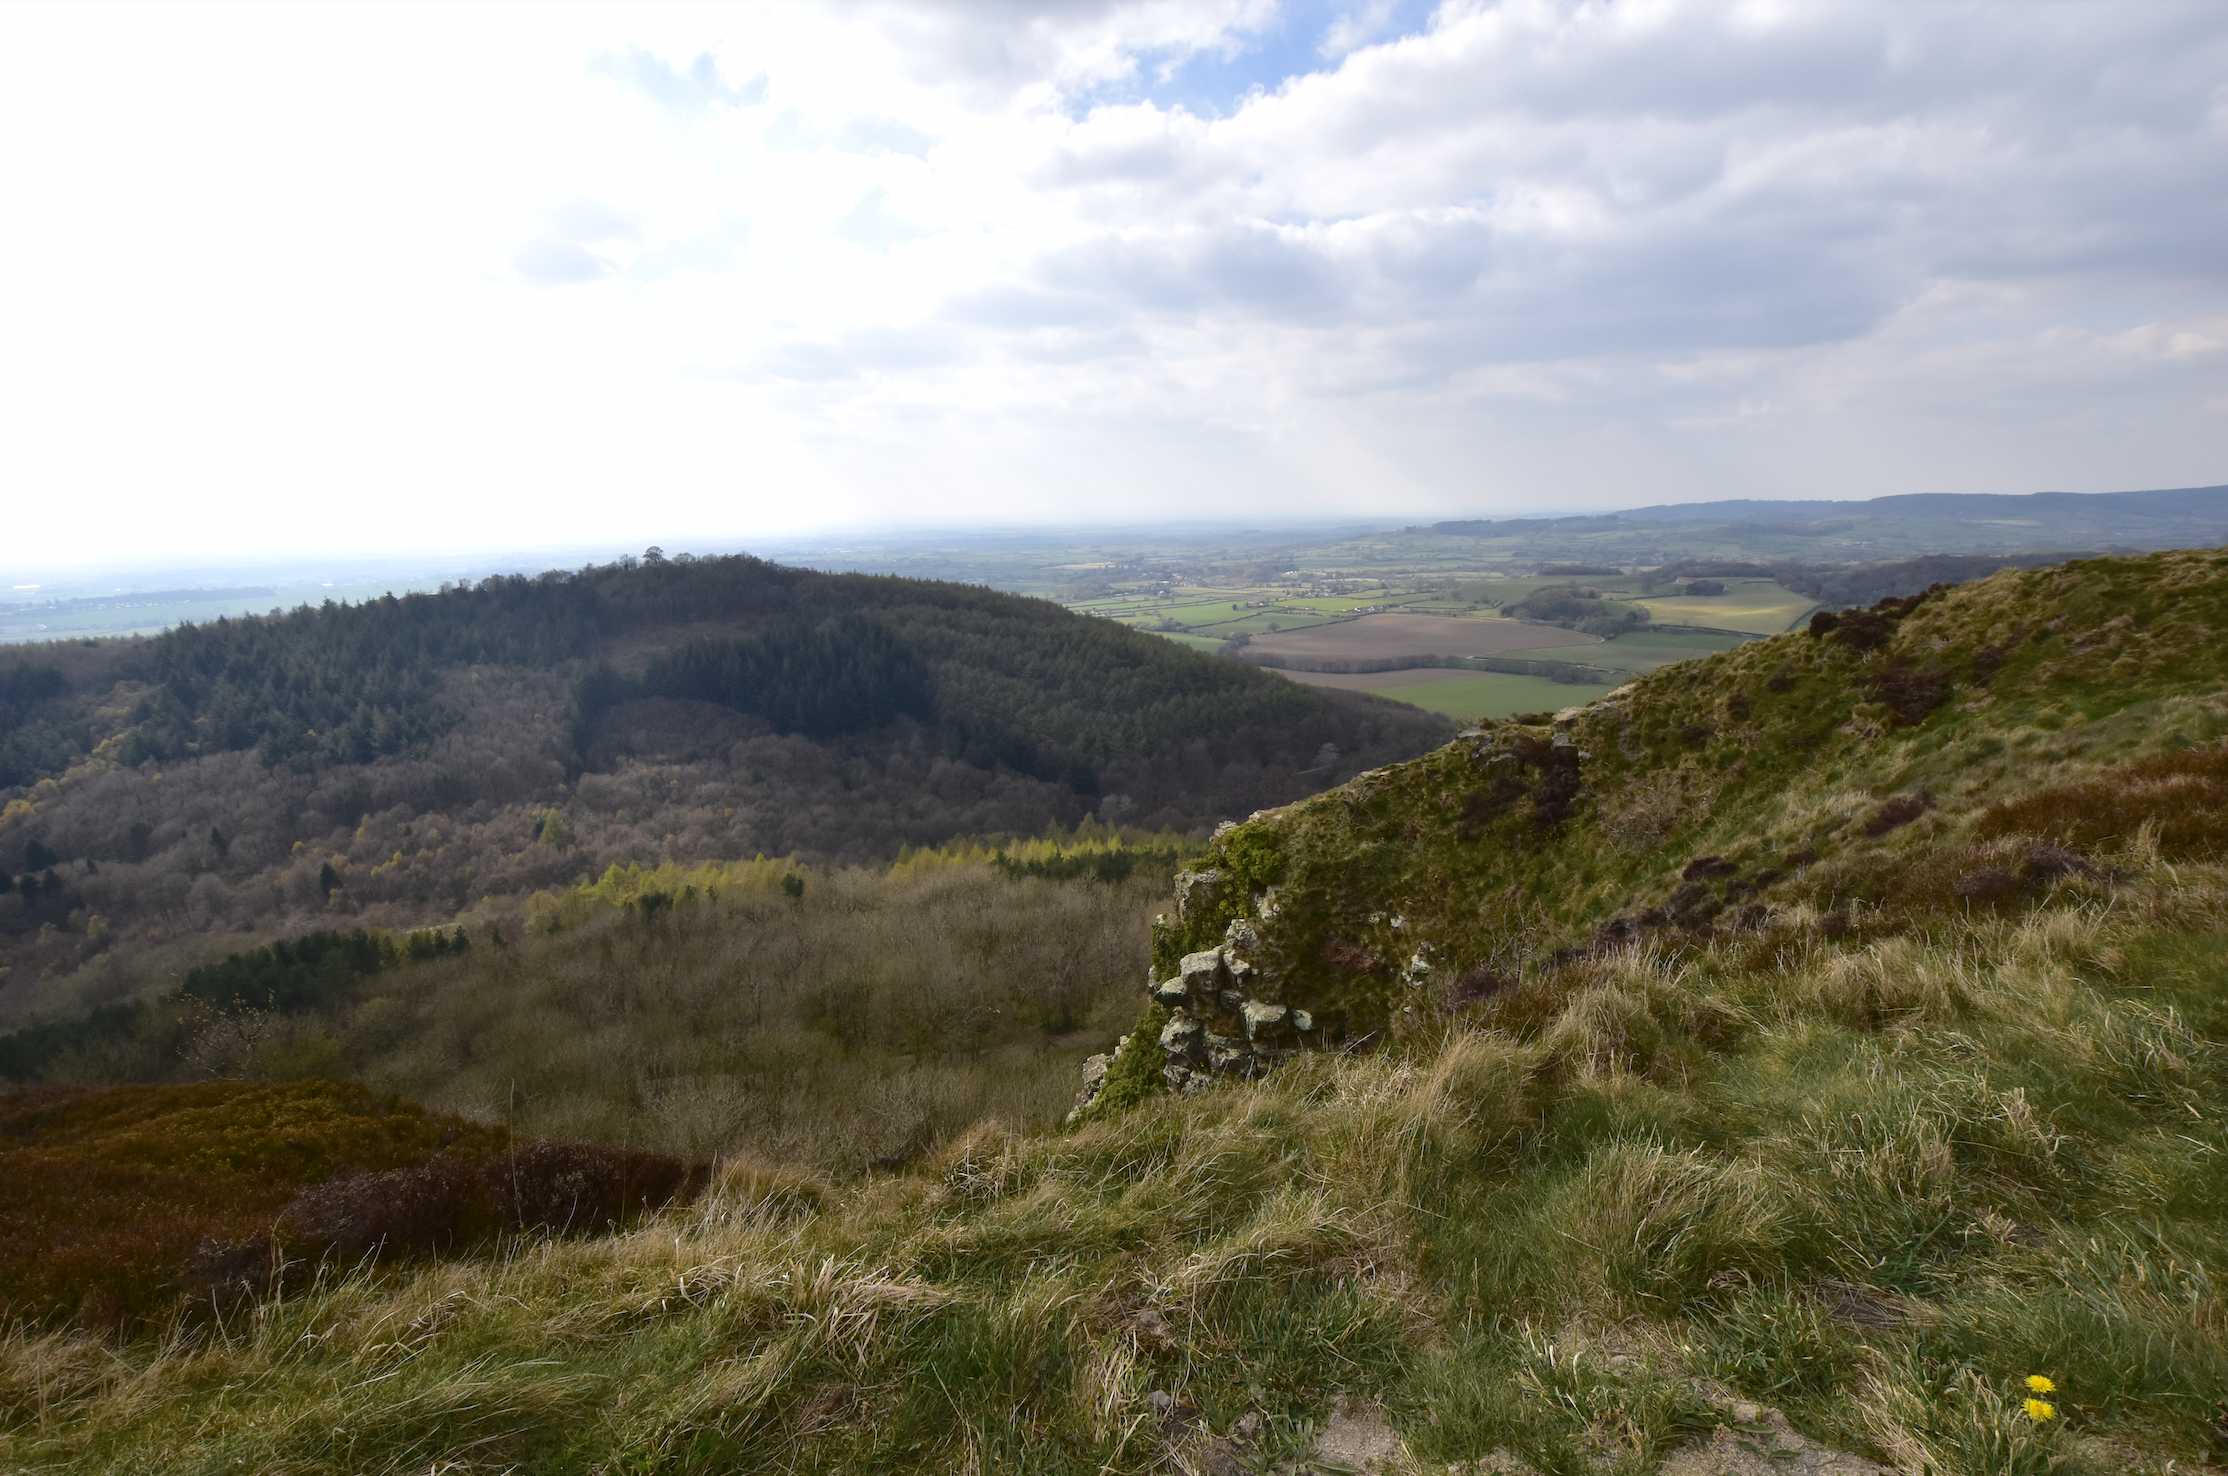  Sutton Bank - The Finest View in England 